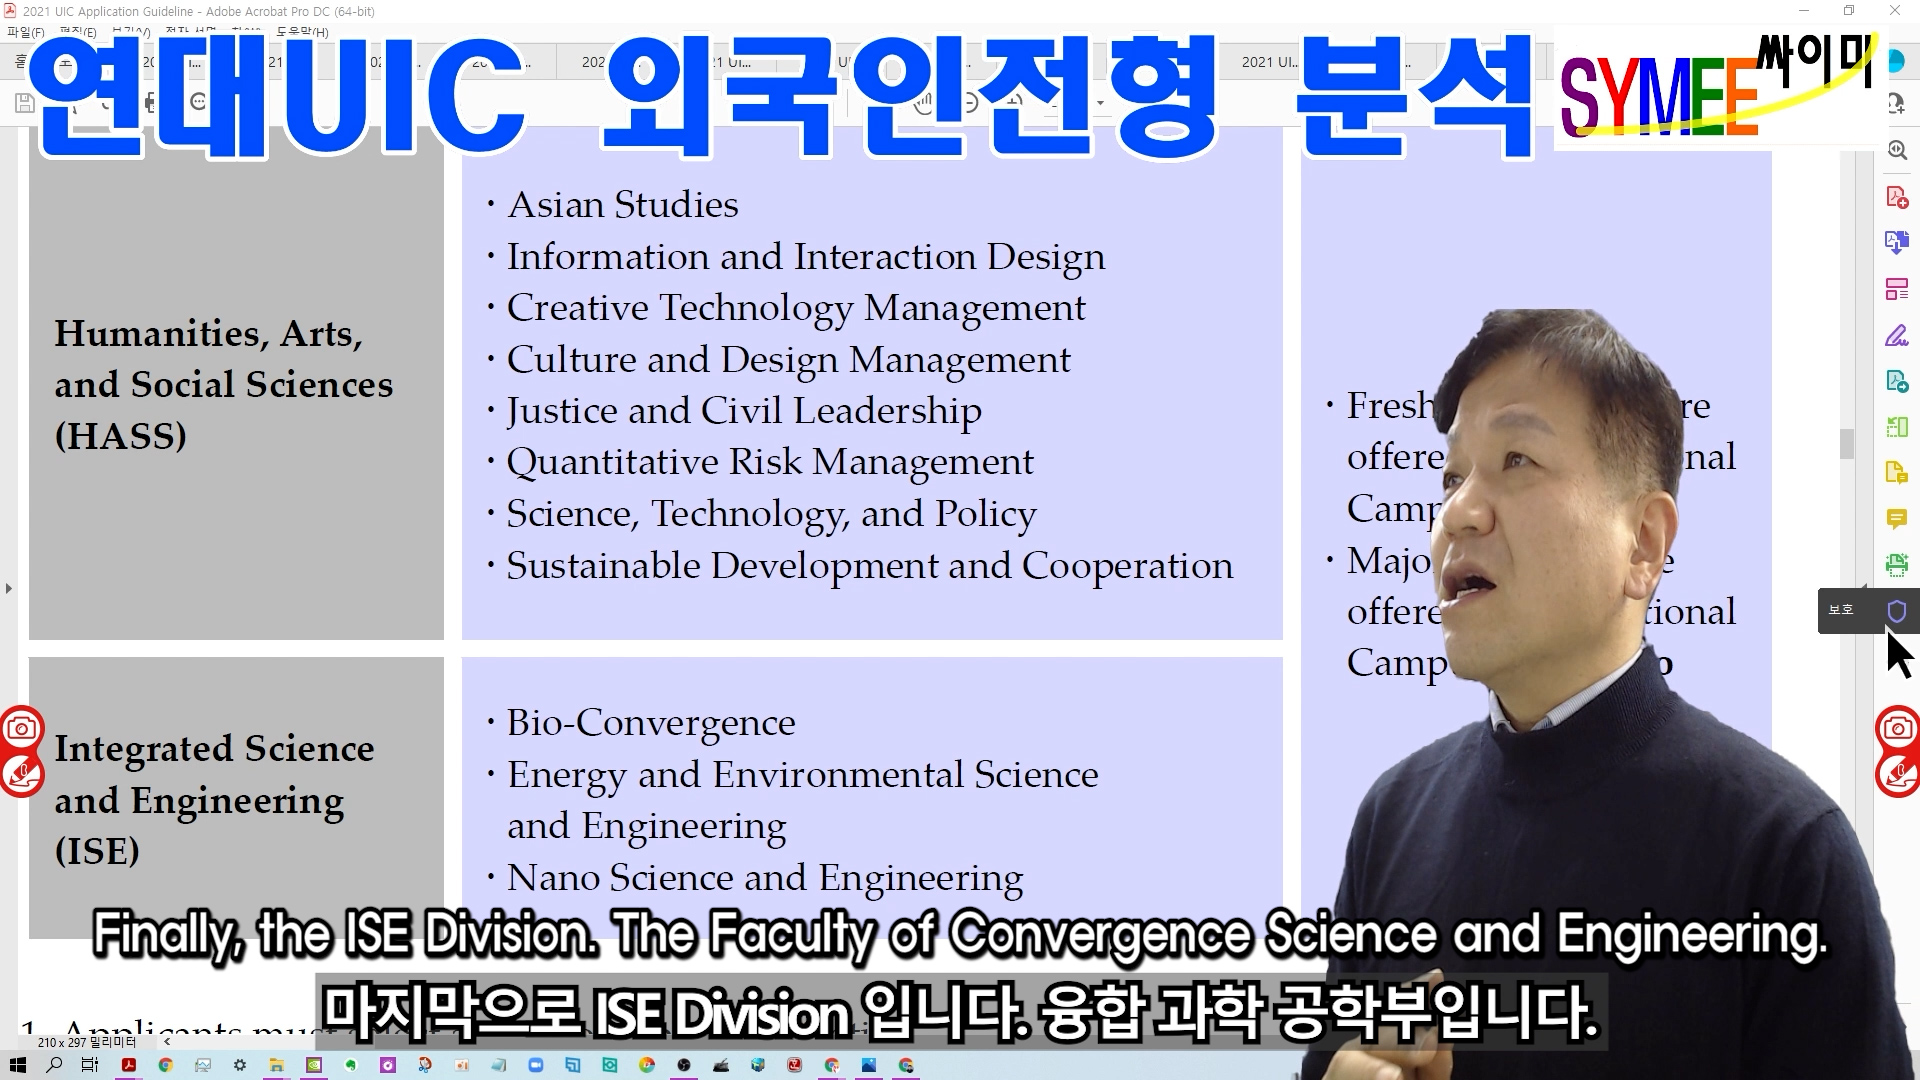 Yonsei Univ. Admission for UIC for Foreign Student 05 Majors.00_05_47_36.스틸 009.jpg